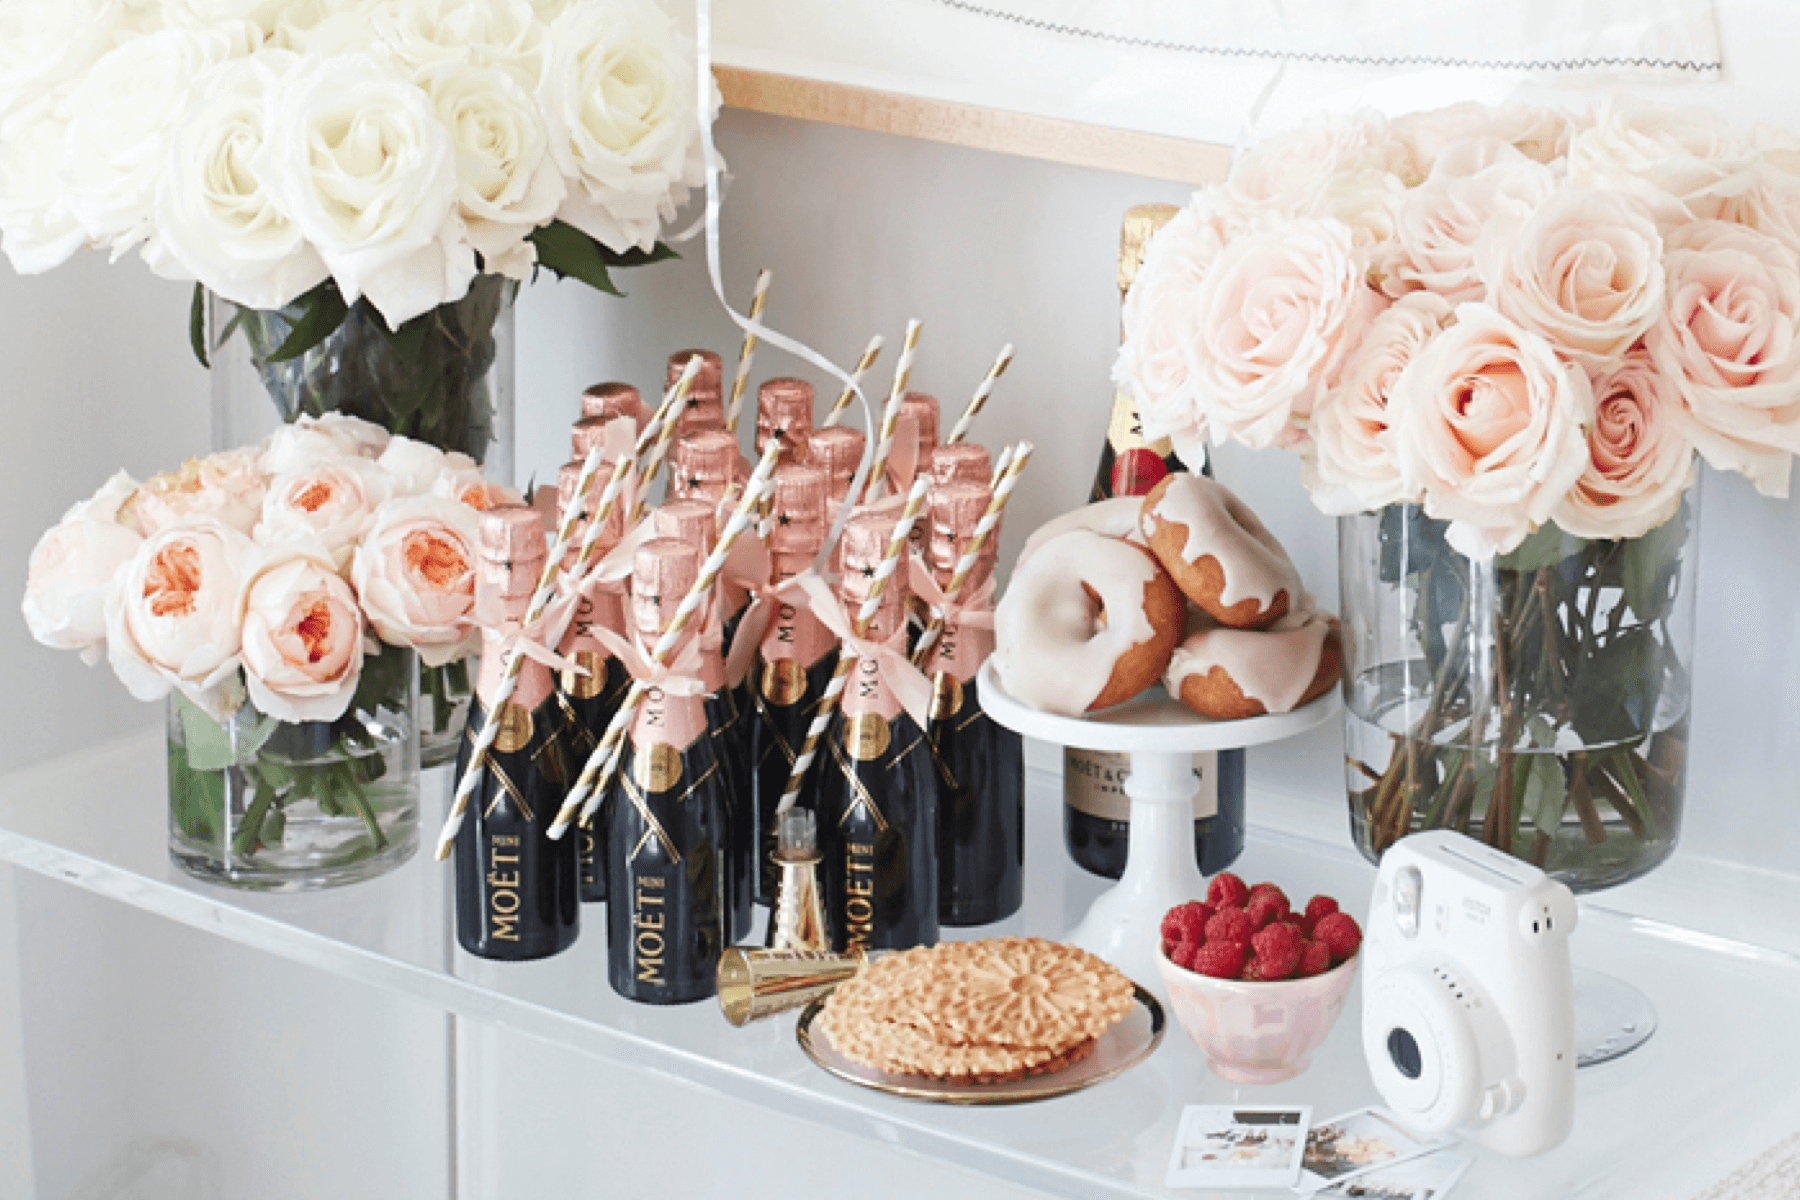 A shelf with white and pink roses, mini Champagne bottles, doughnuts, and a white Fuji Instax camera.